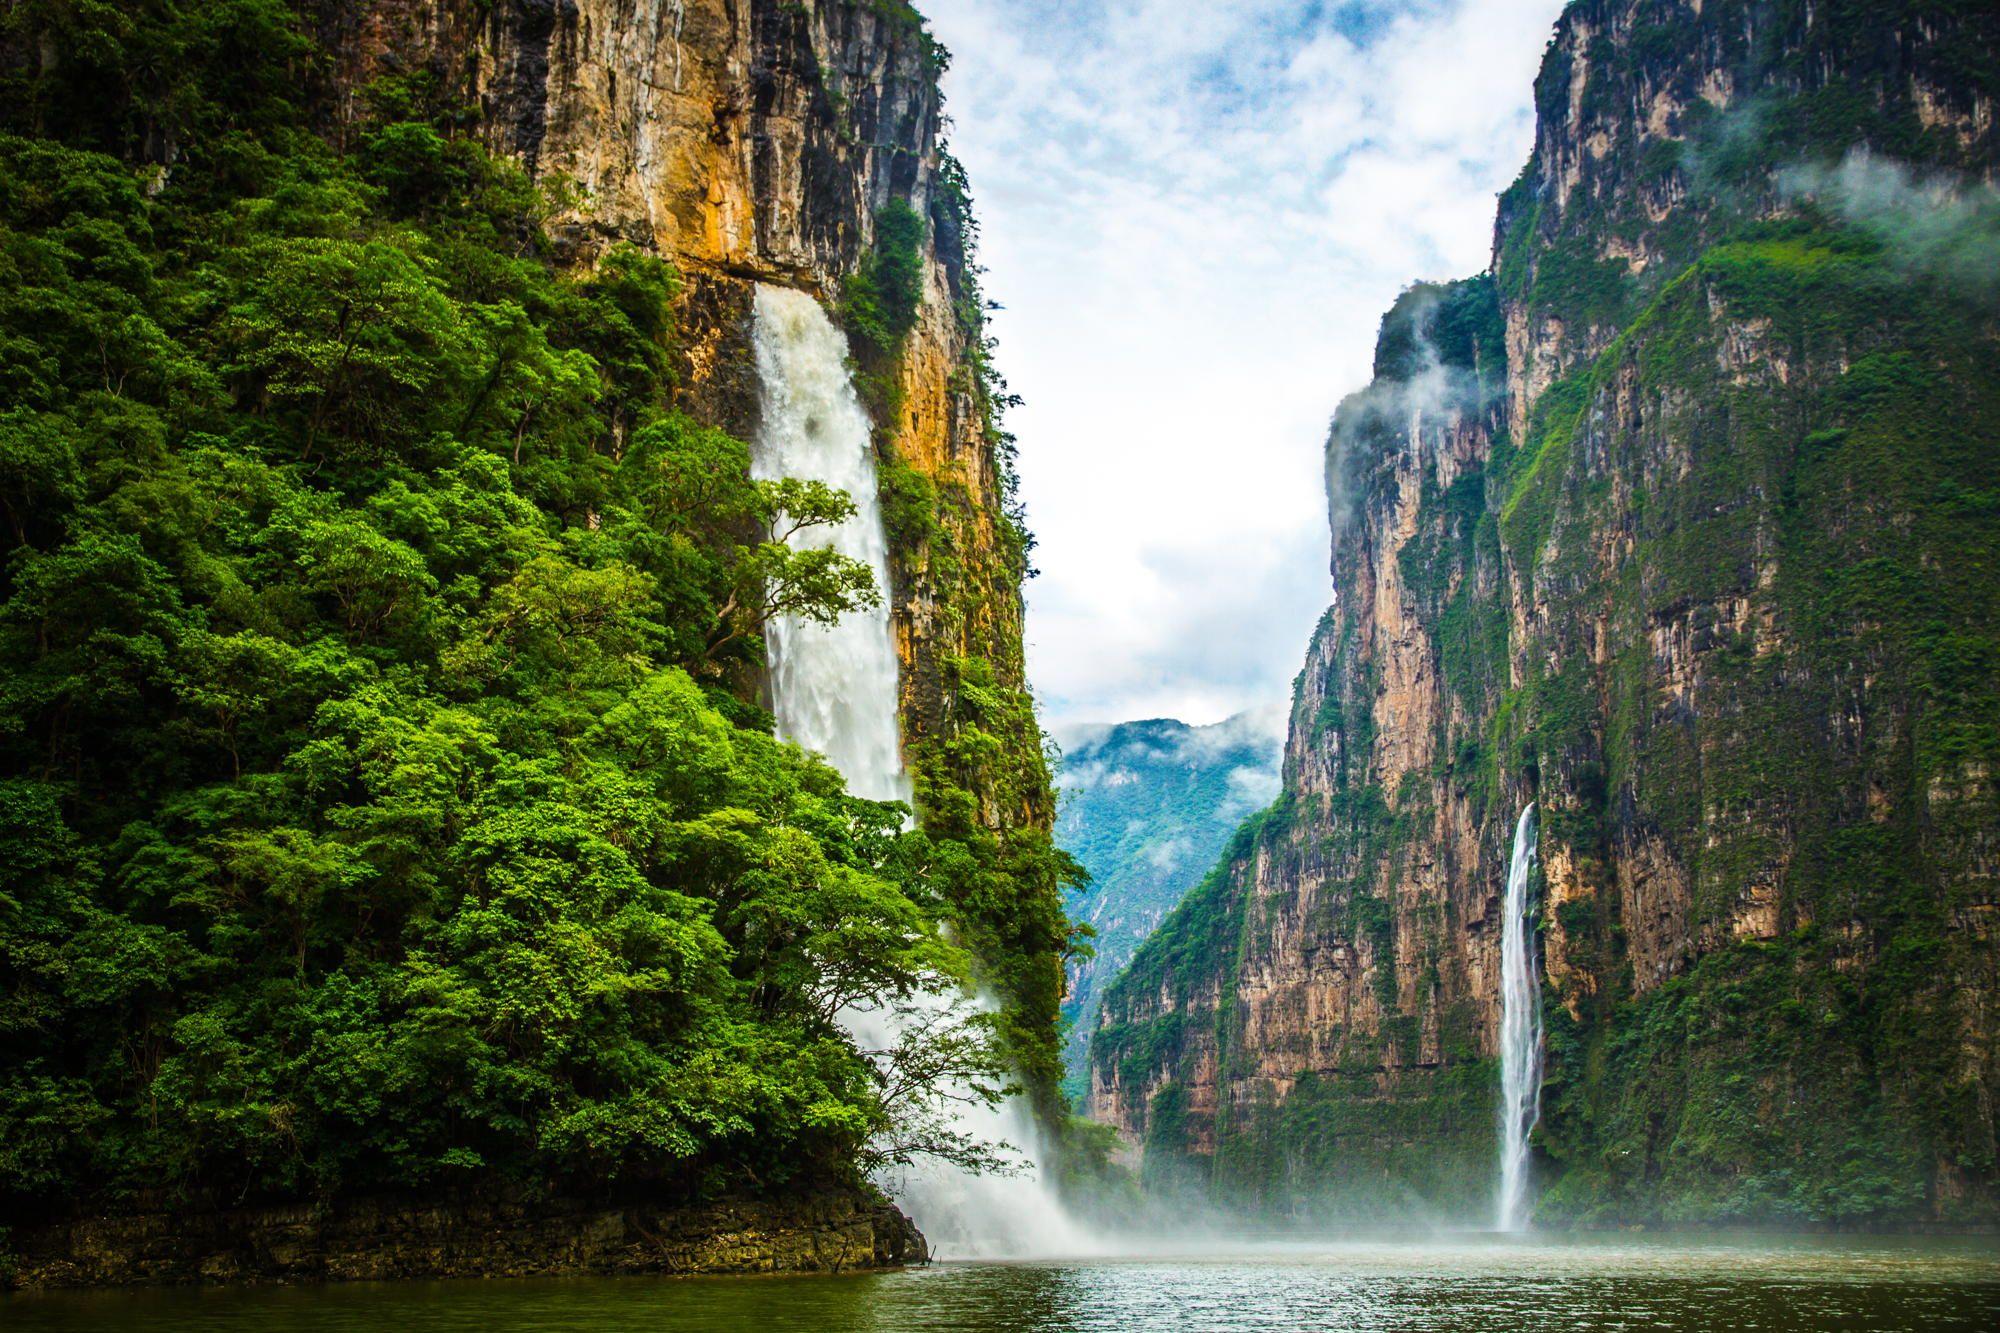 Photograph Sumidero Canyon by Travis White on 500px. Mexico in 2019